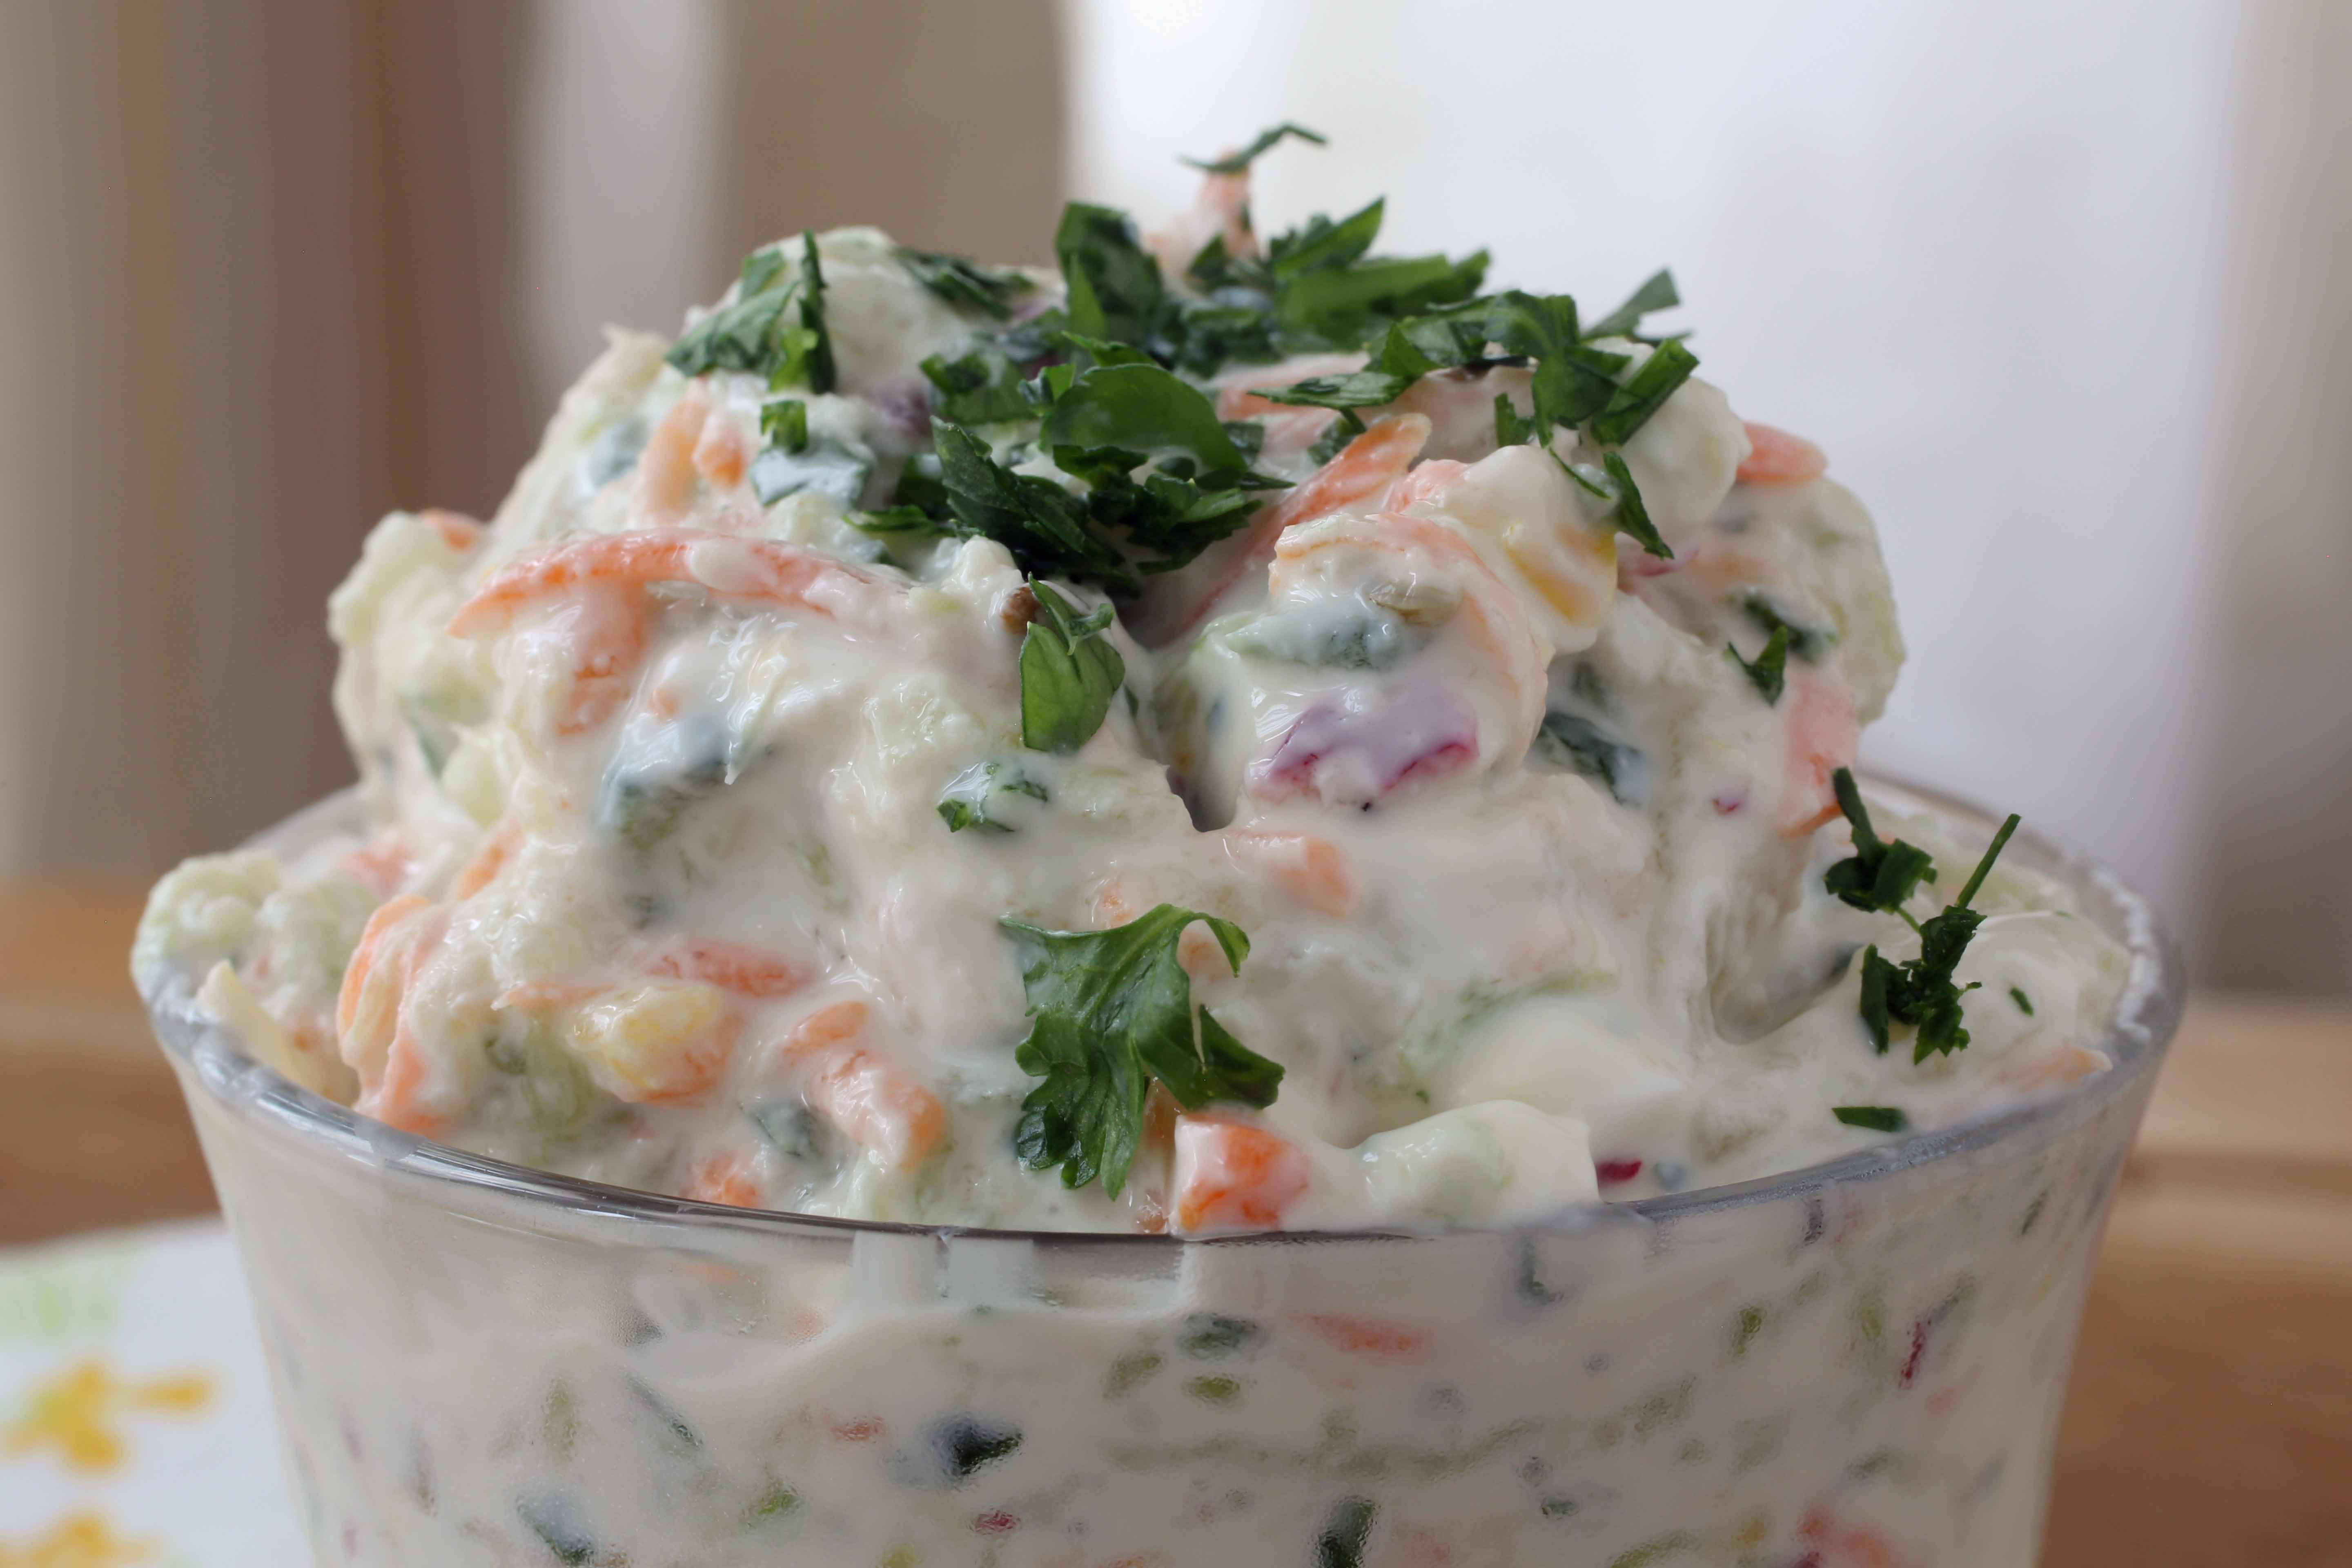 How To Make Vegetable Dip